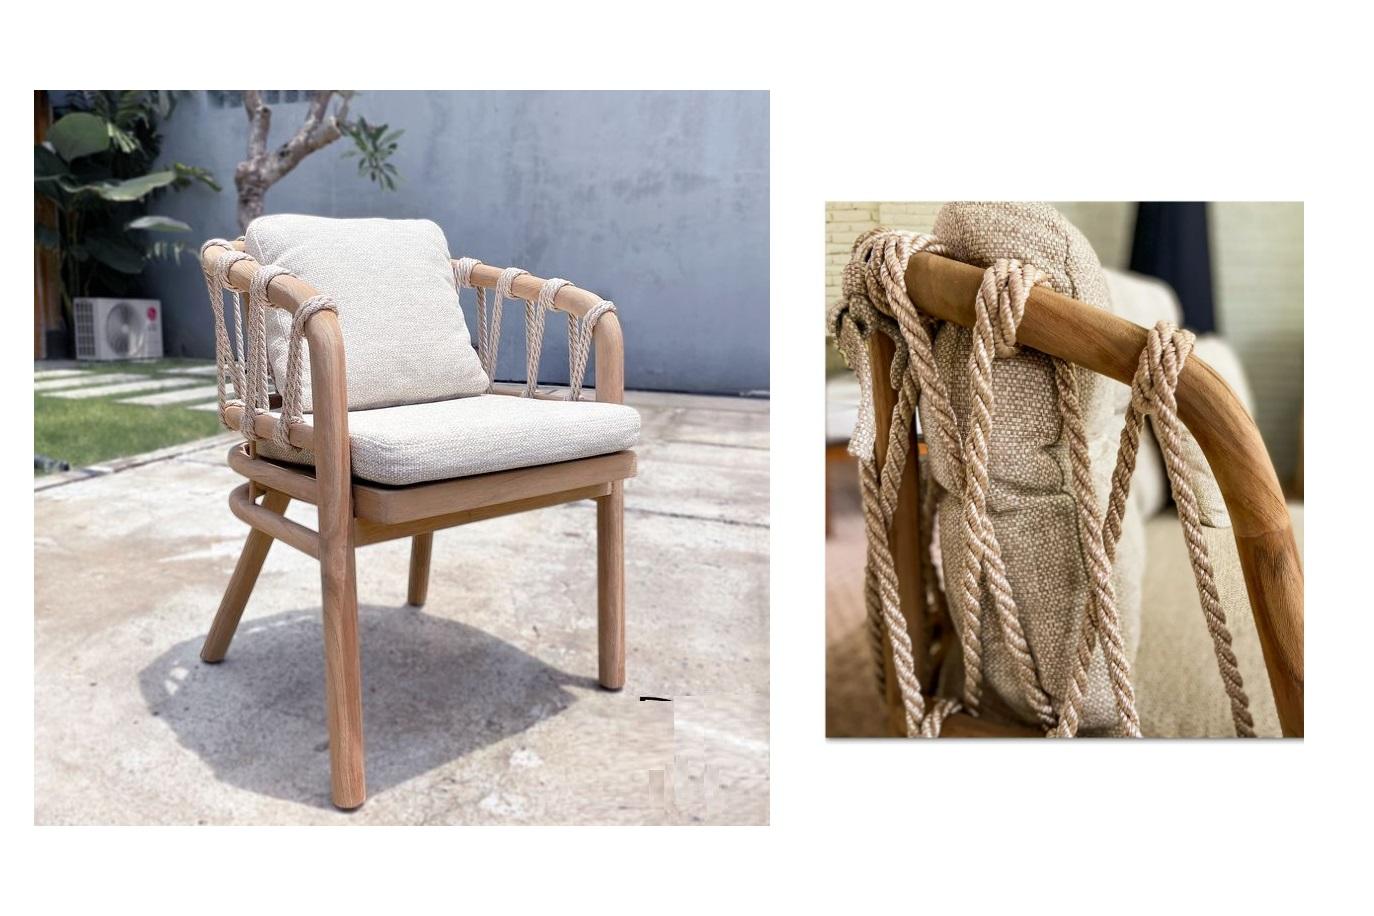 The Material: Our products use taut, clean, and highly tenacious rope made of 100% polyester. What makes this material special is because the characteristic of polyester that is extremely strong, very durable: resistant to most chemicals, stretching